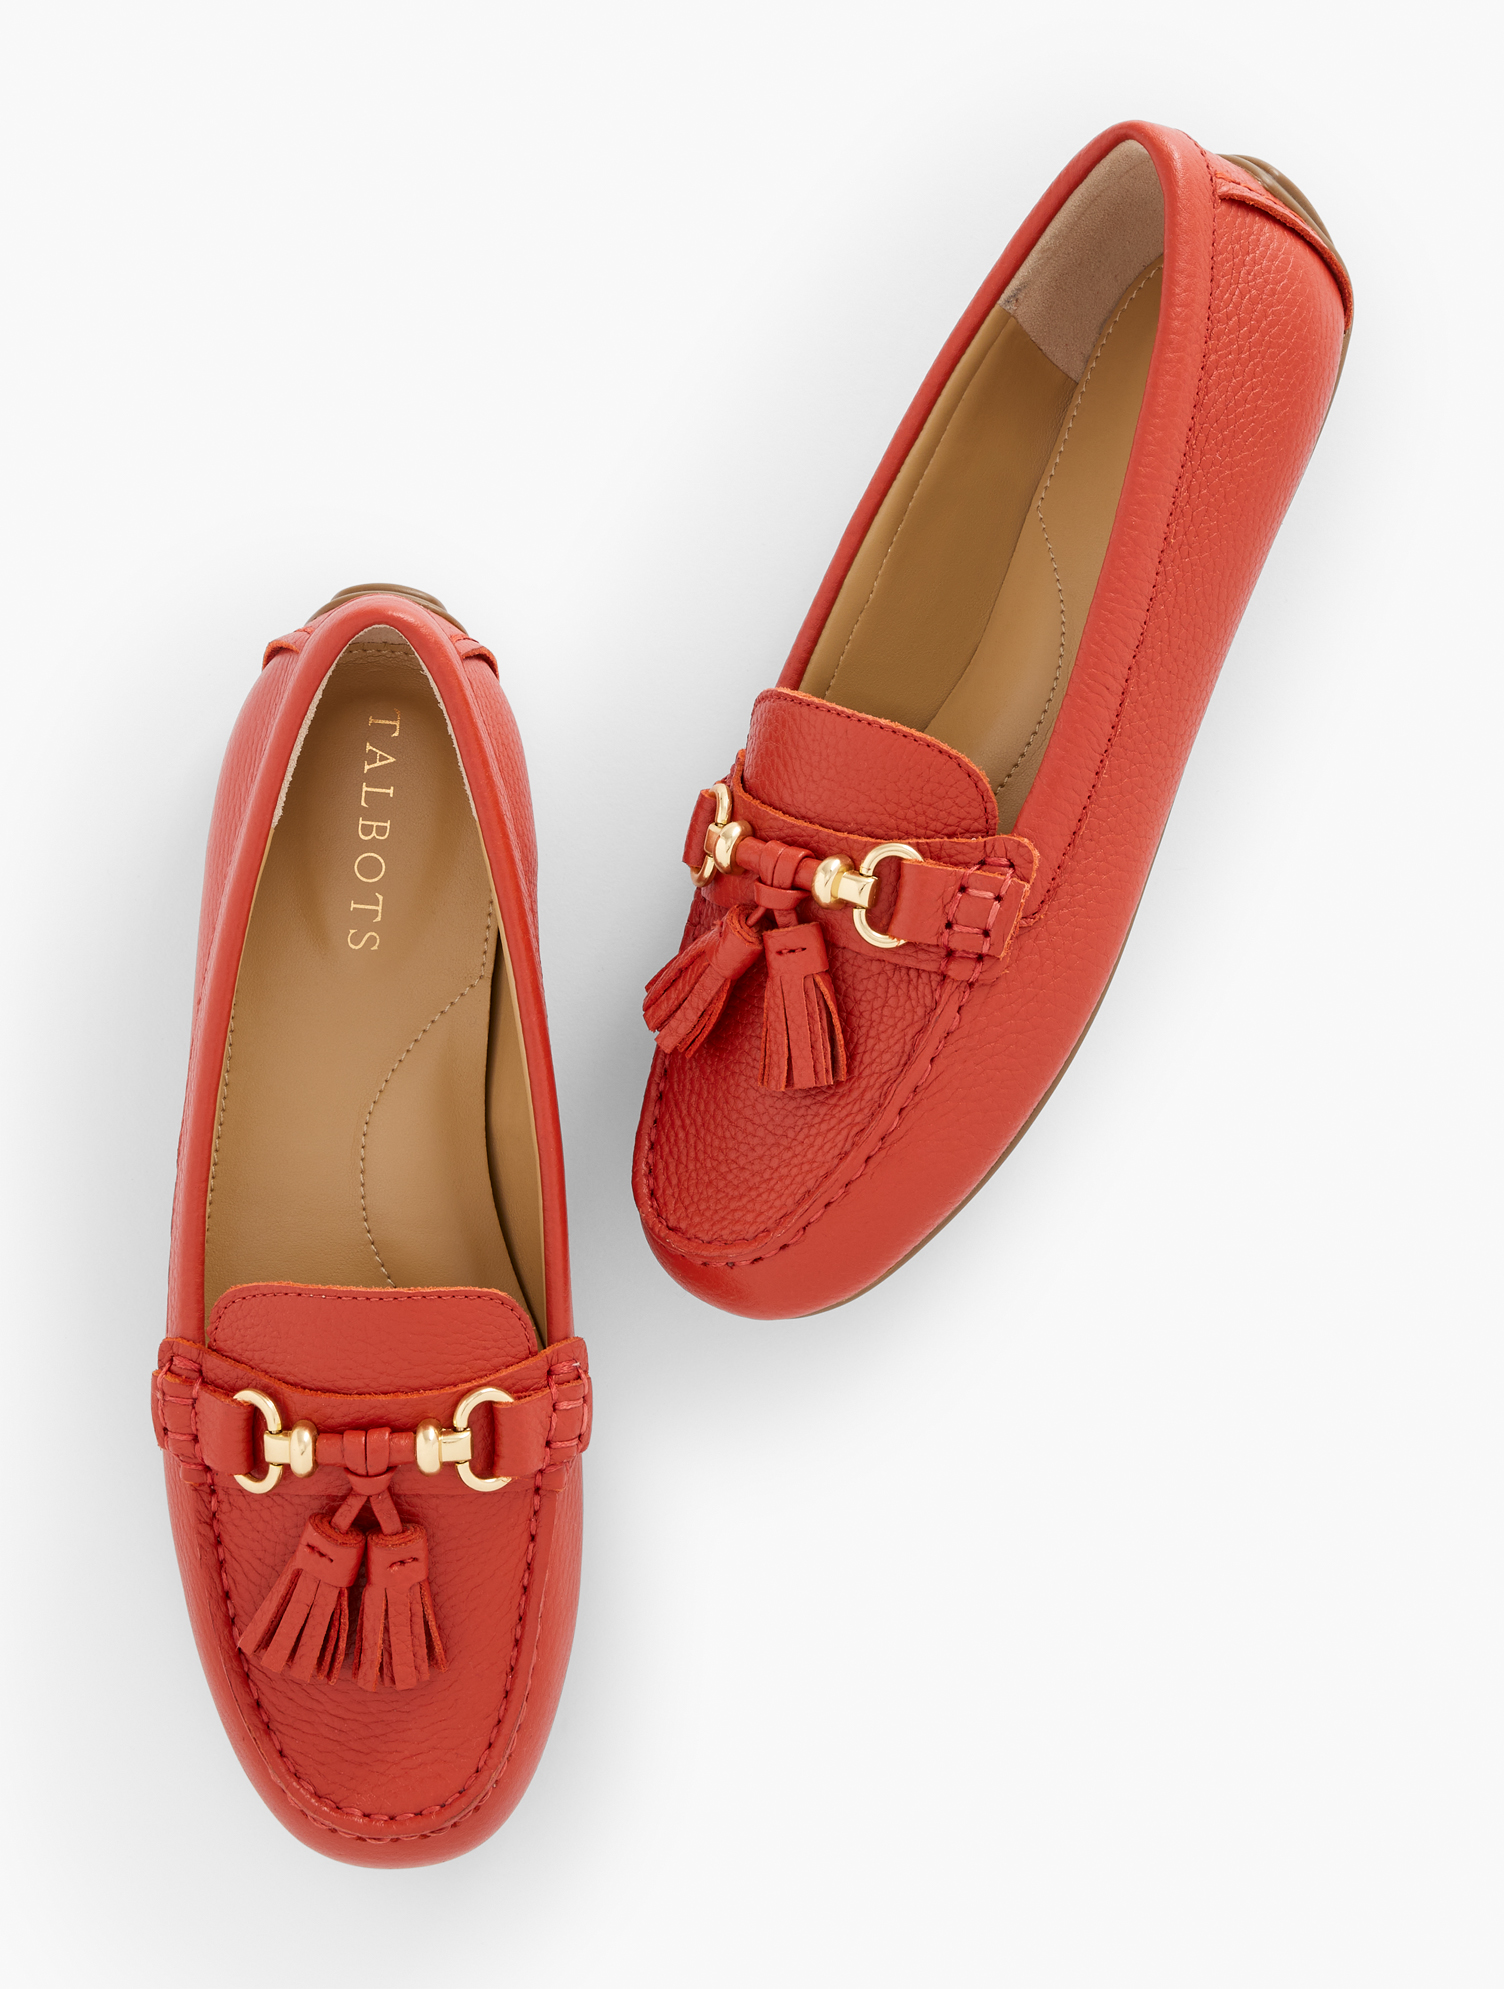 Talbots Everson Tassel Driving Moccasins Shoes - Leather - Cinnamon - 11m